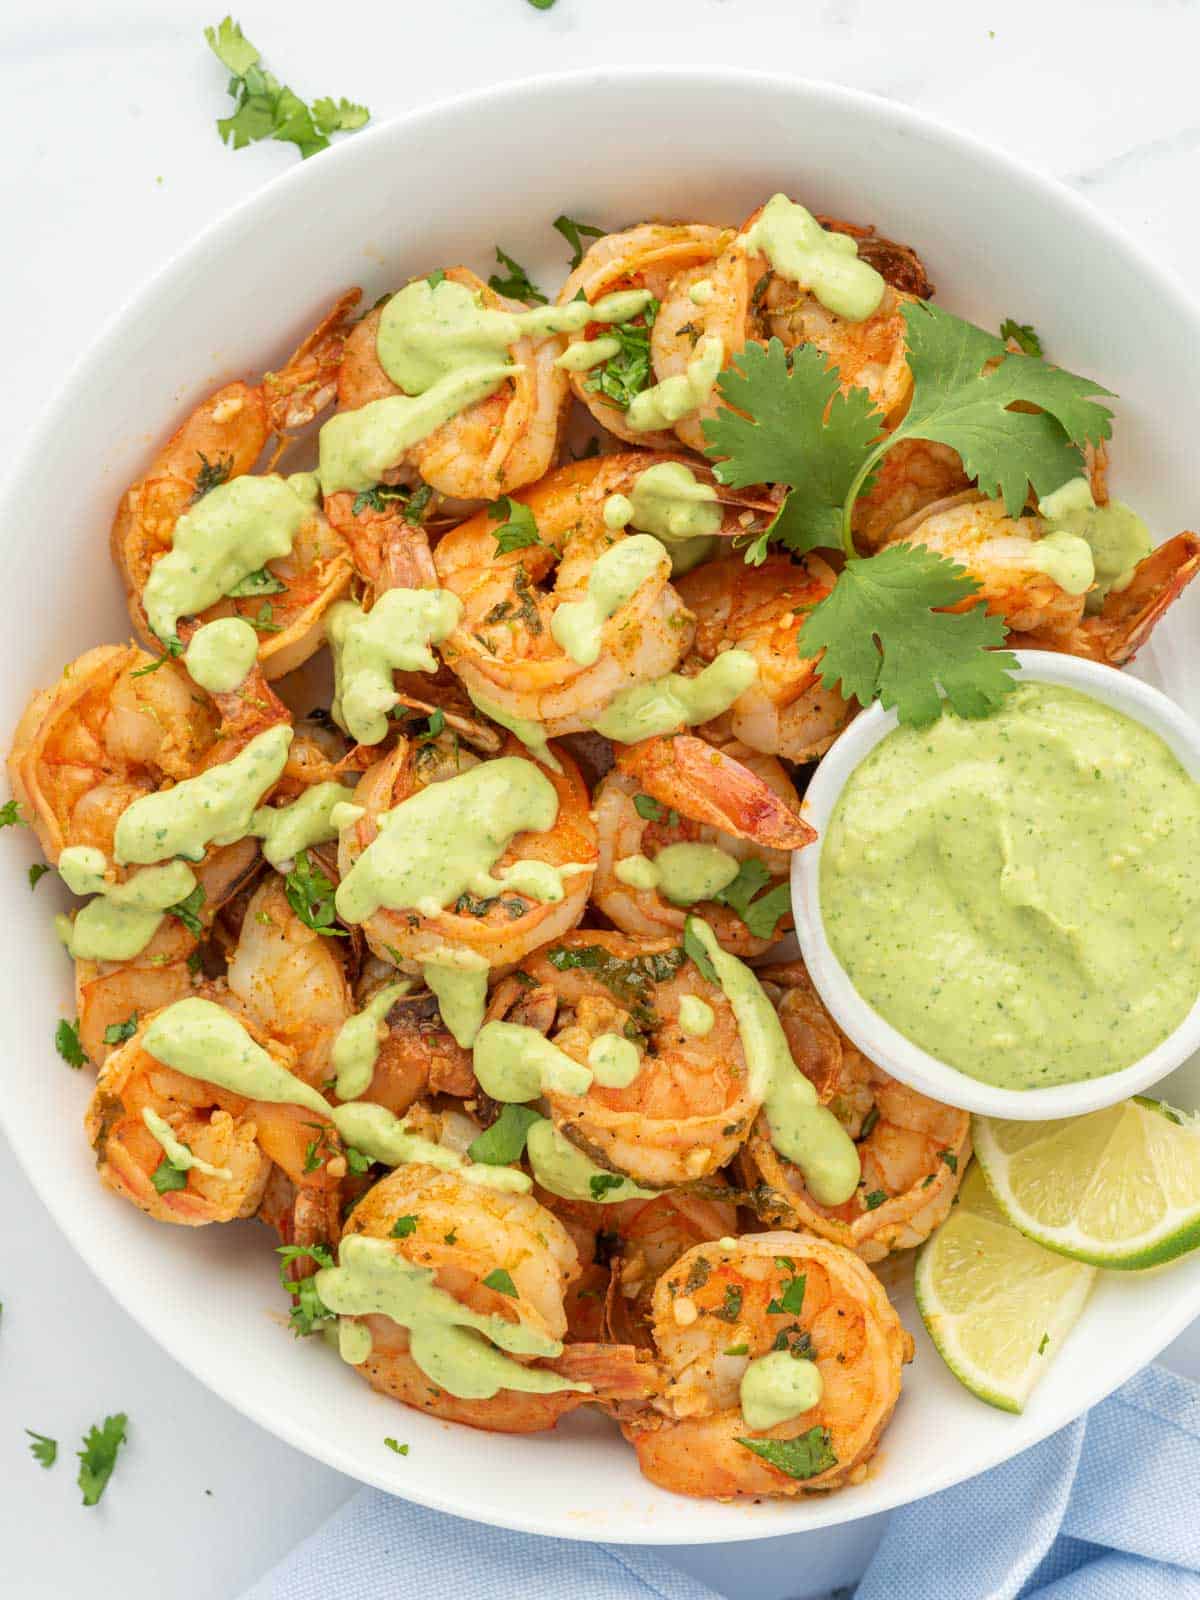 Chili powder shrimp in serving bowl drizzled with aioli.